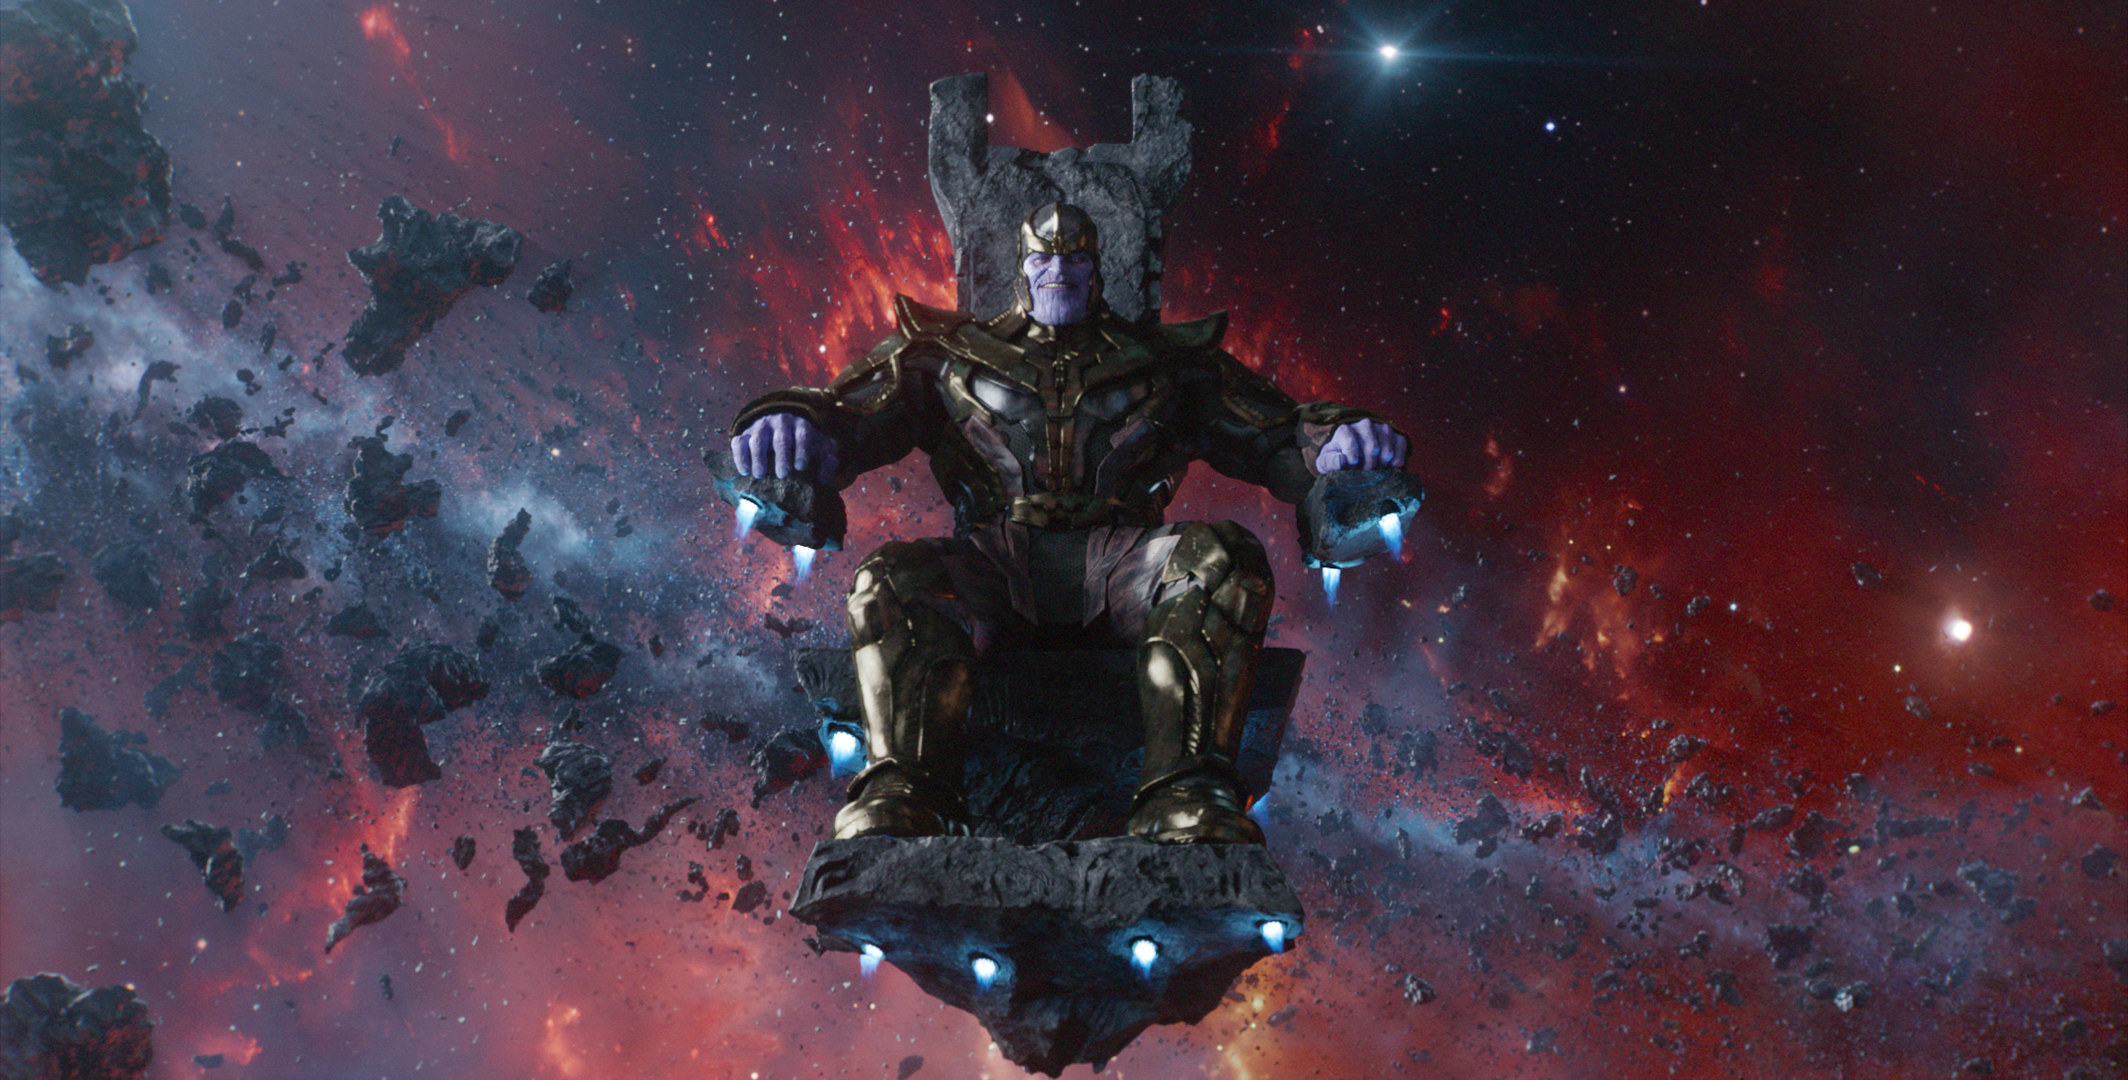 Thanos sits on his throne